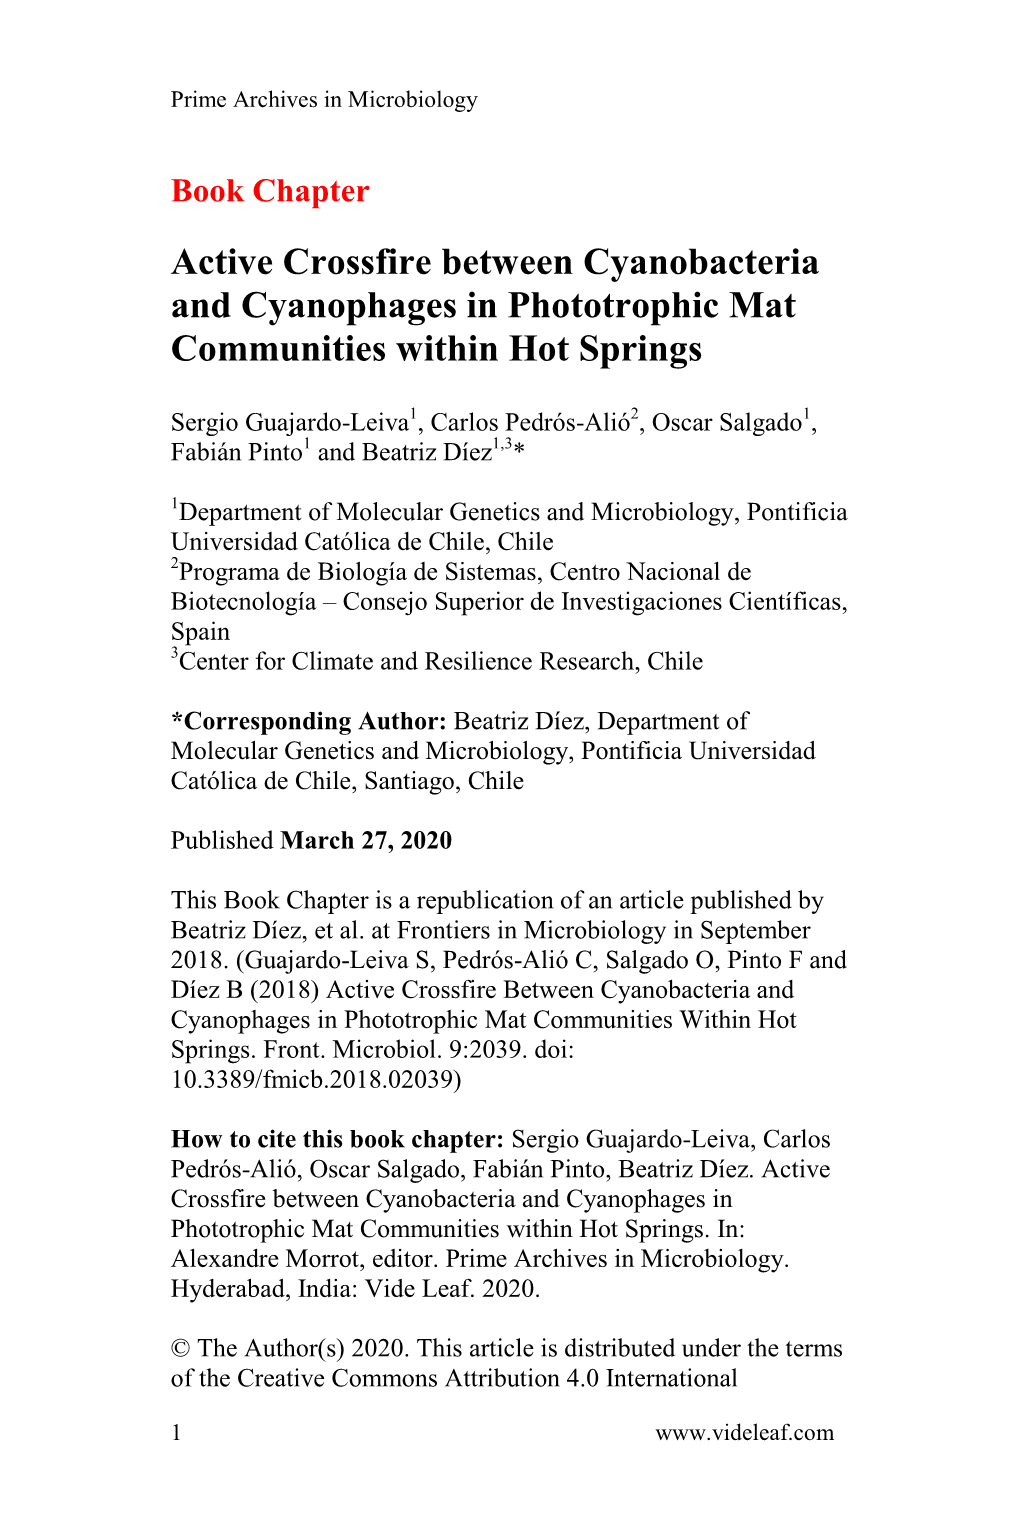 Active Crossfire Between Cyanobacteria and Cyanophages in Phototrophic Mat Communities Within Hot Springs